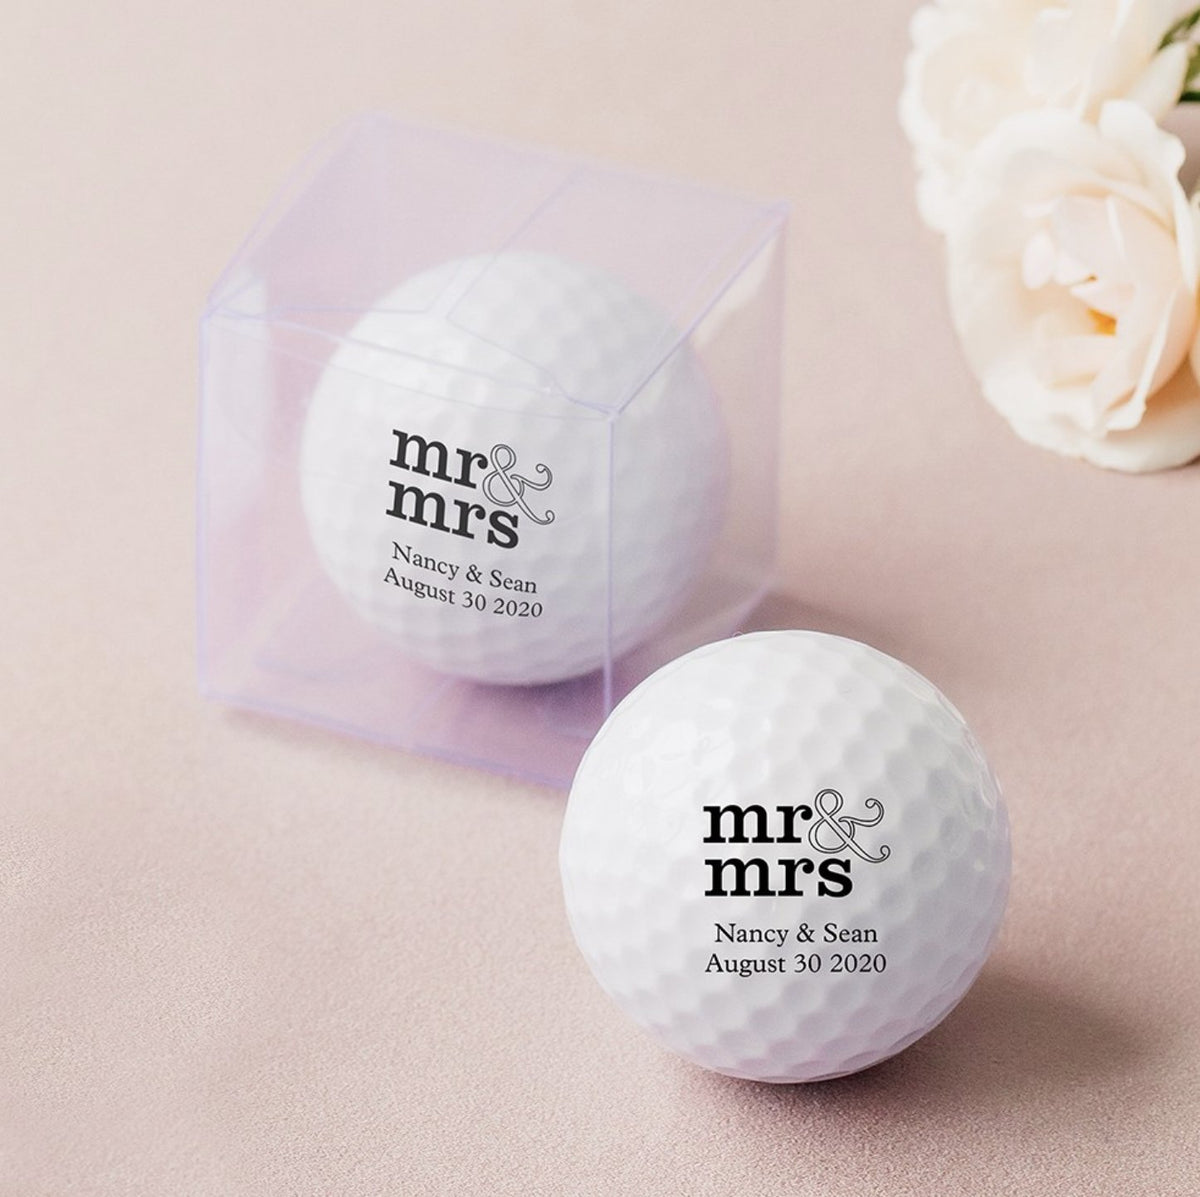 Personalized Golf Ball Wedding Favors - Forever Wedding Favors